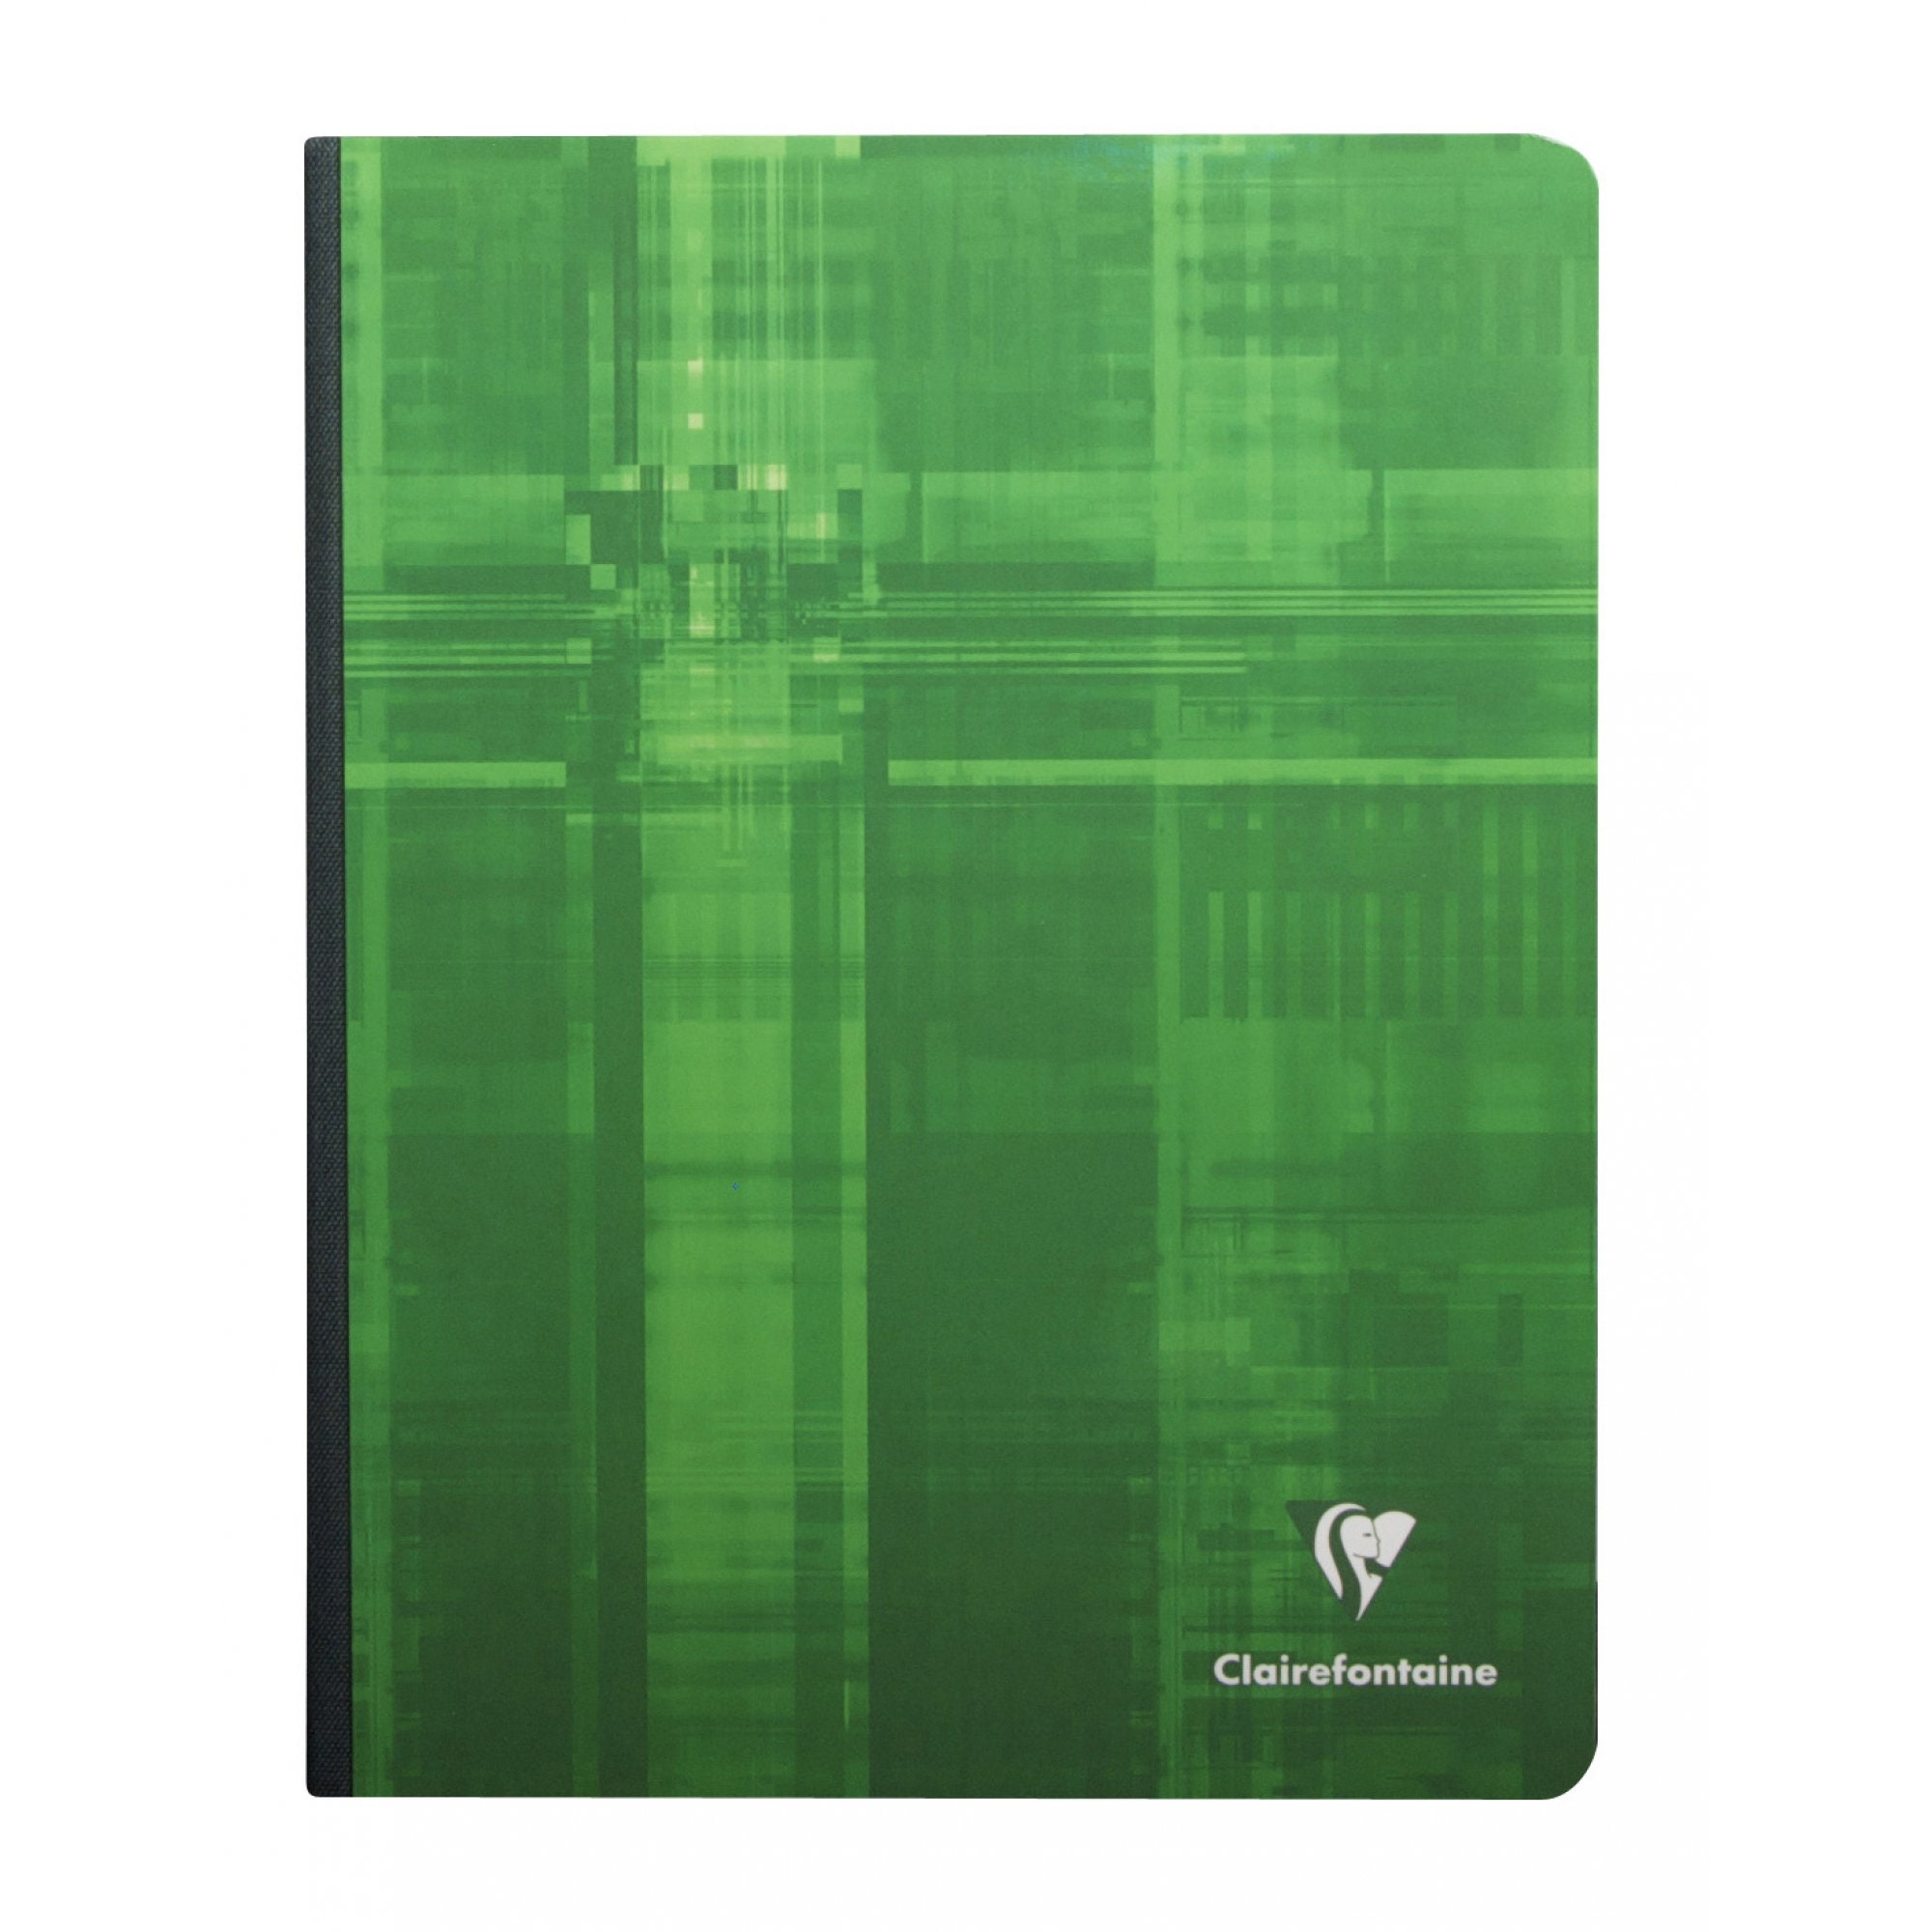 Clairefontaine Notebook Guide